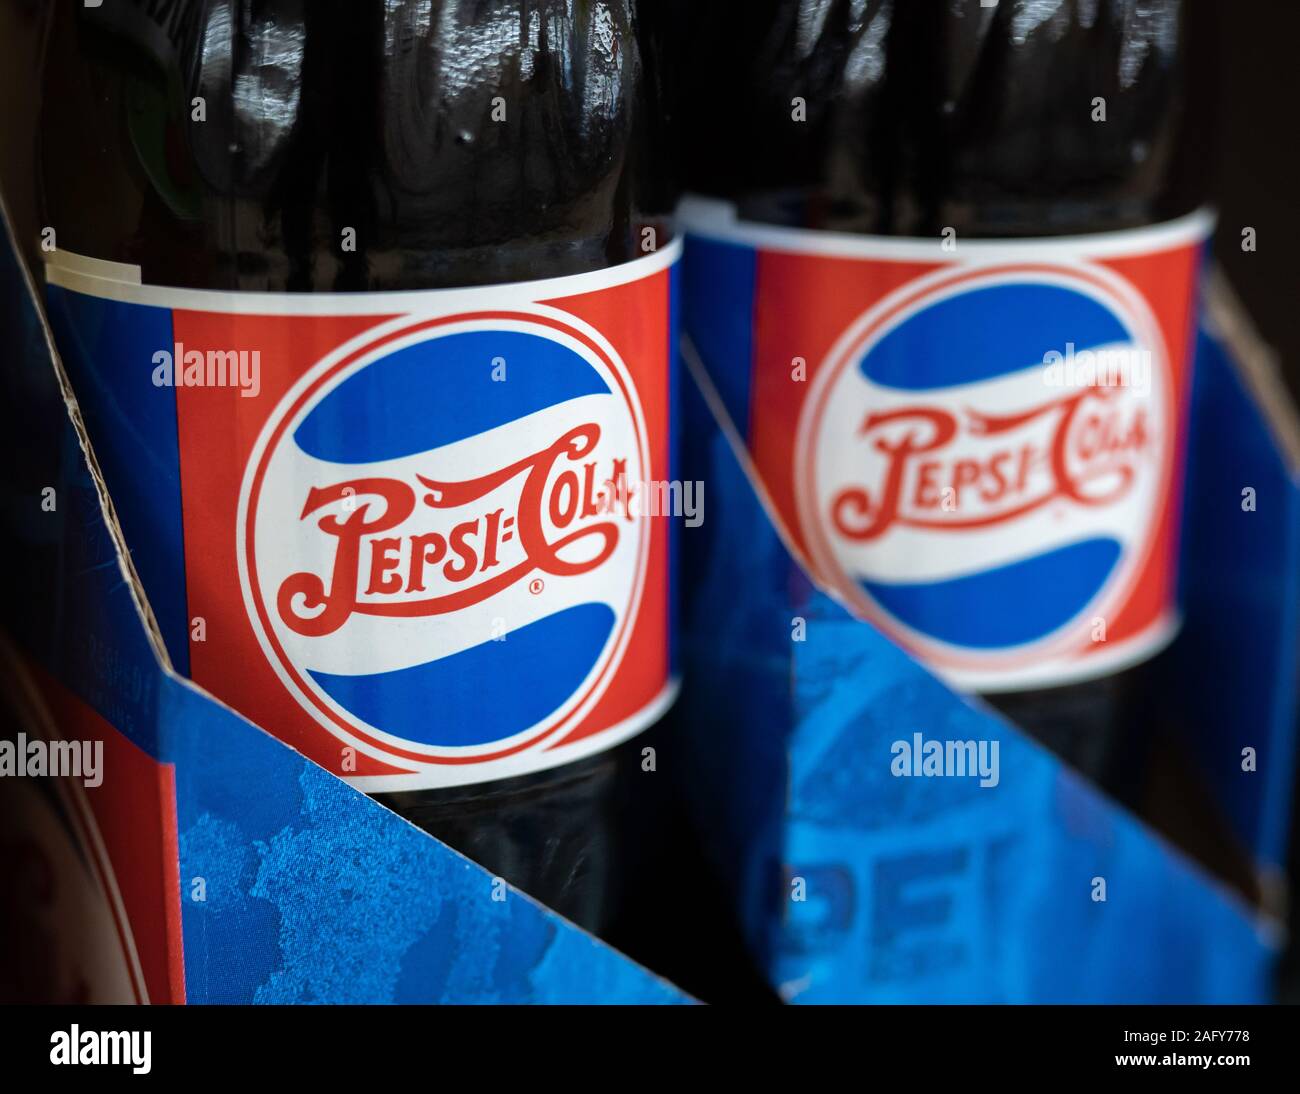 Classic Pepsi Cola logo and packaging design. Stock Photo